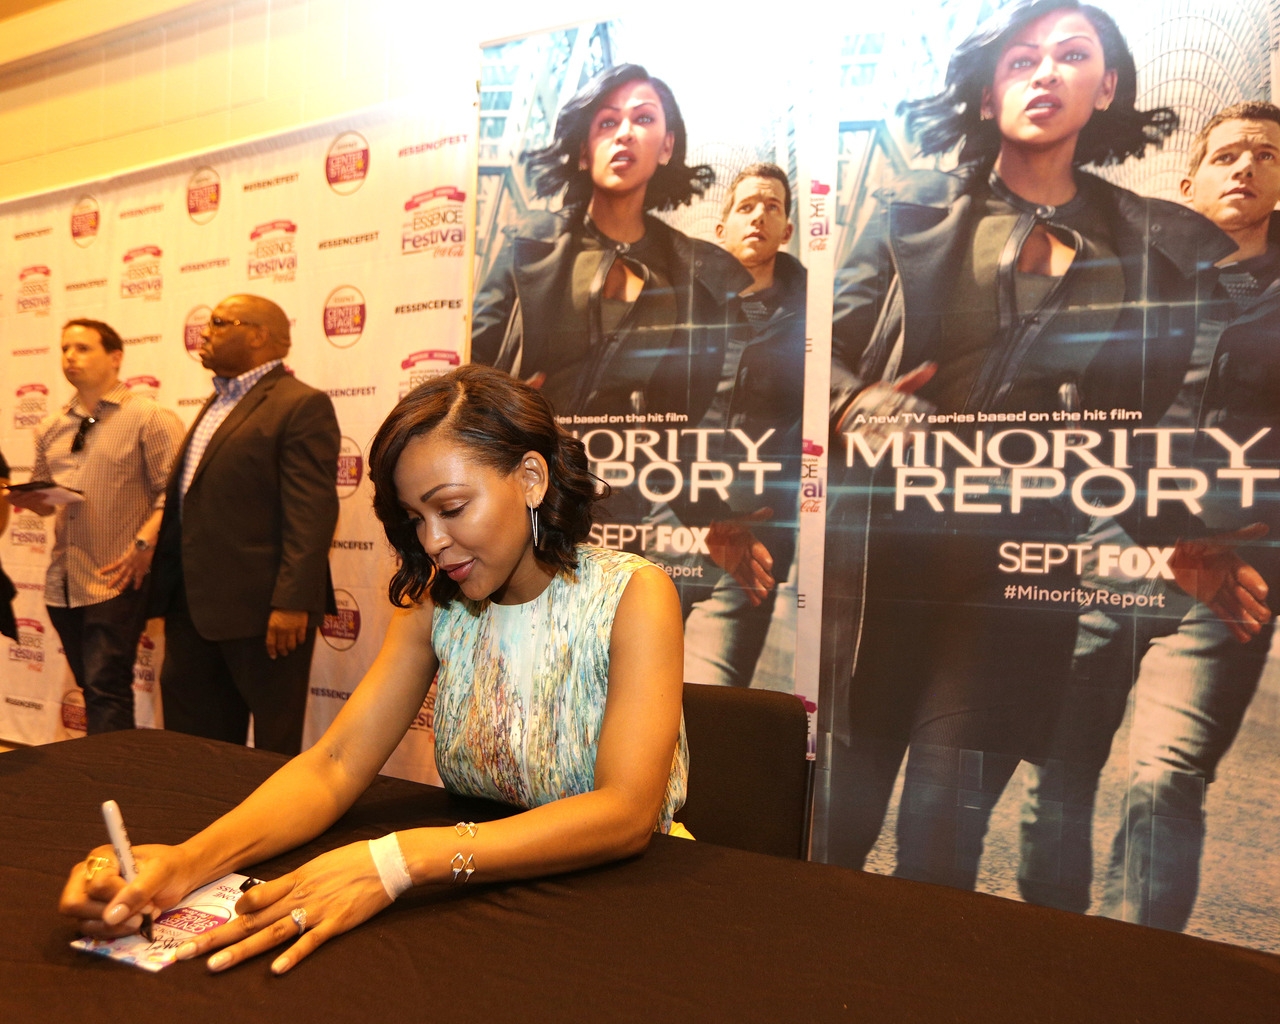 Minority Report Autograph Session for 1280 x 1024 resolution